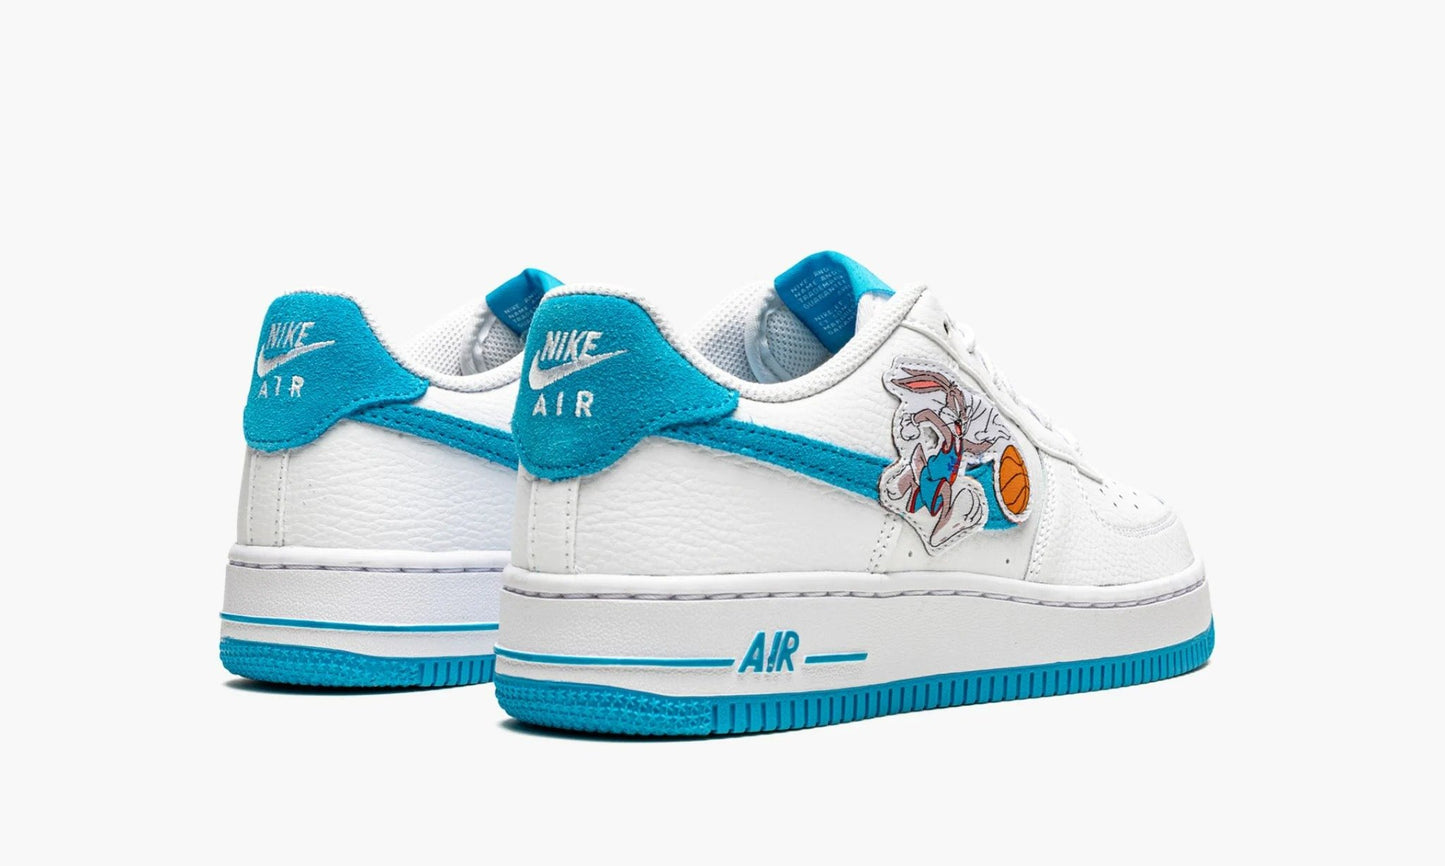 Force 1 Low GS "Hare Space Jam"